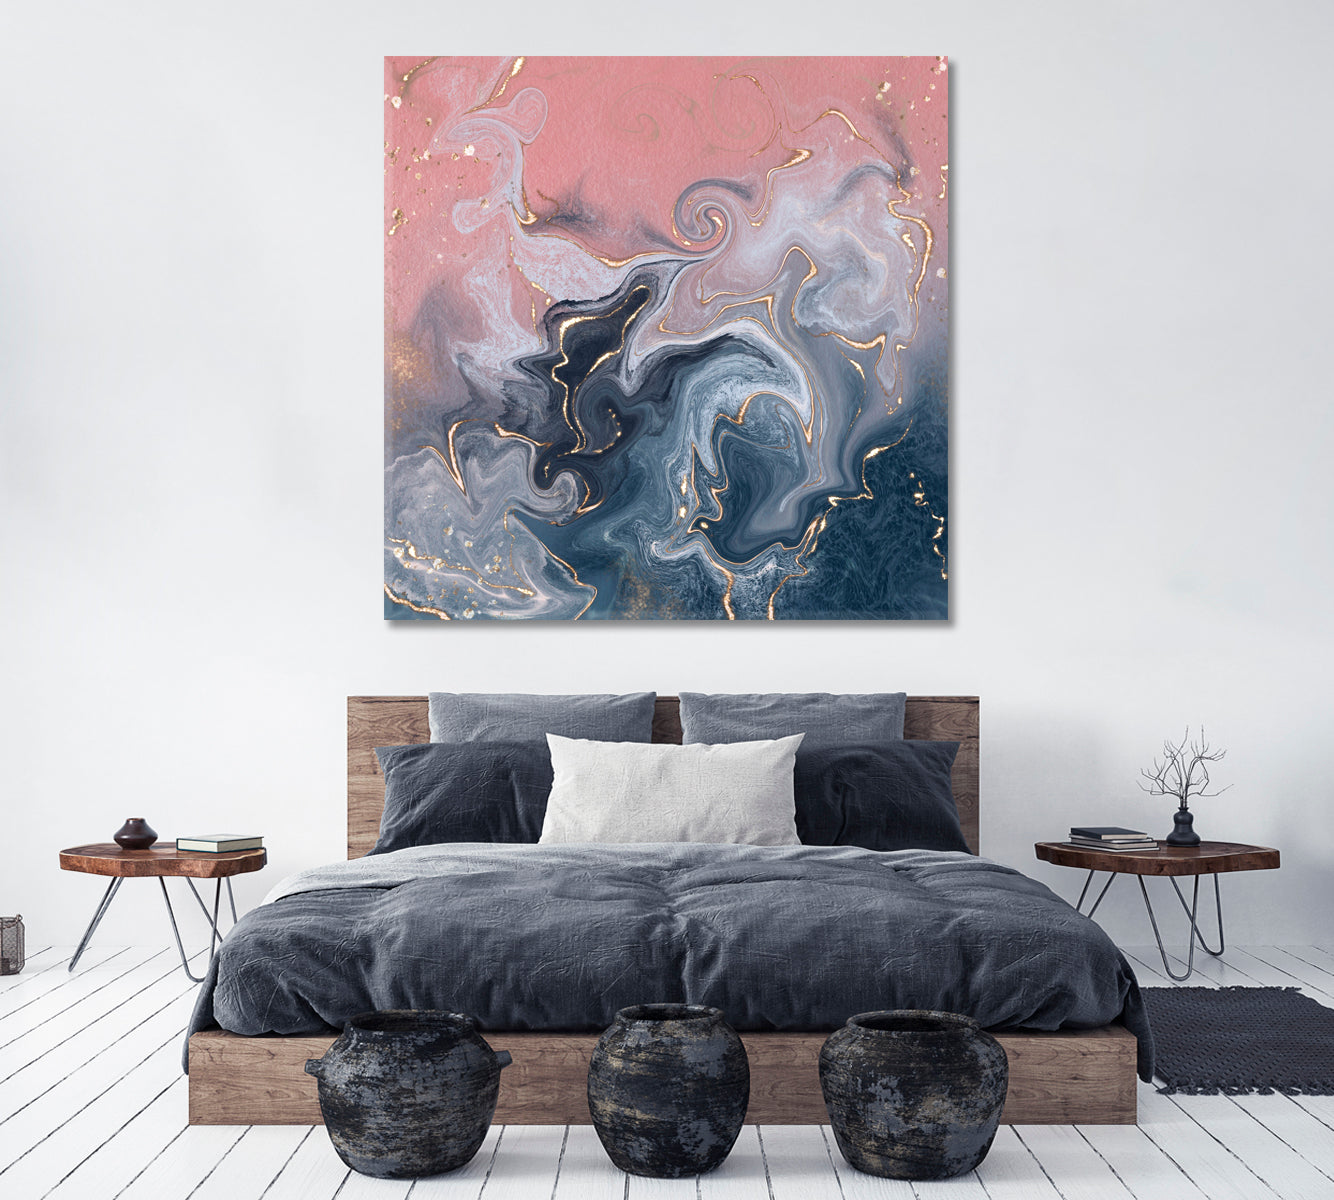 Abstract Pink and Gray Marble Swirls Canvas Print ArtLexy 1 Panel 12"x12" inches 